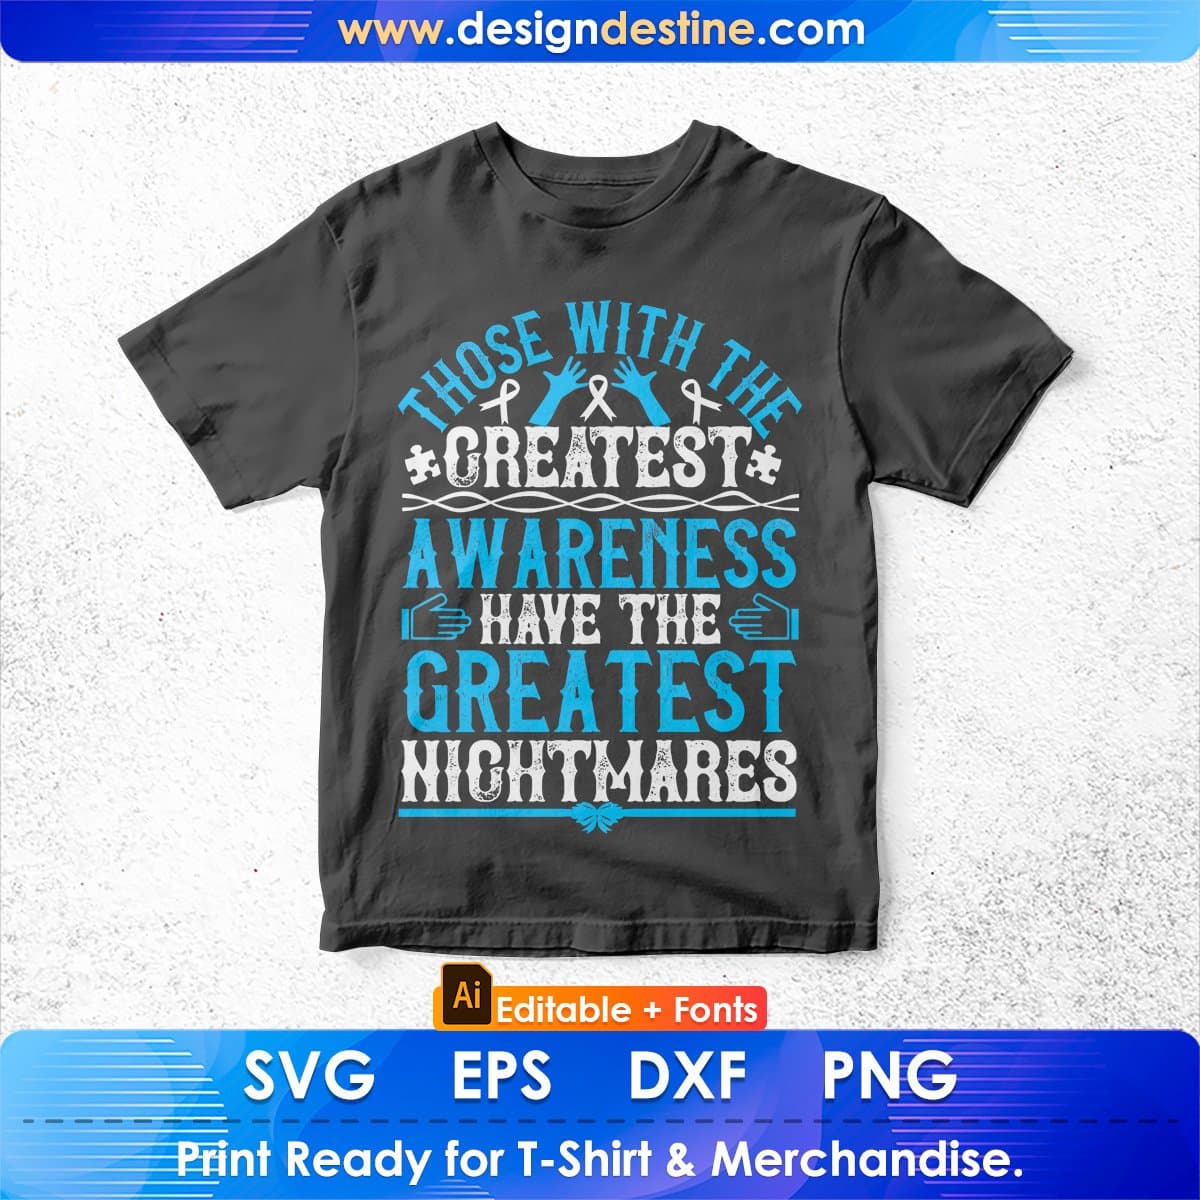 Those With The Greatest Awareness Have The Greatest Nightmares Editable T shirt Design In Ai Svg Files